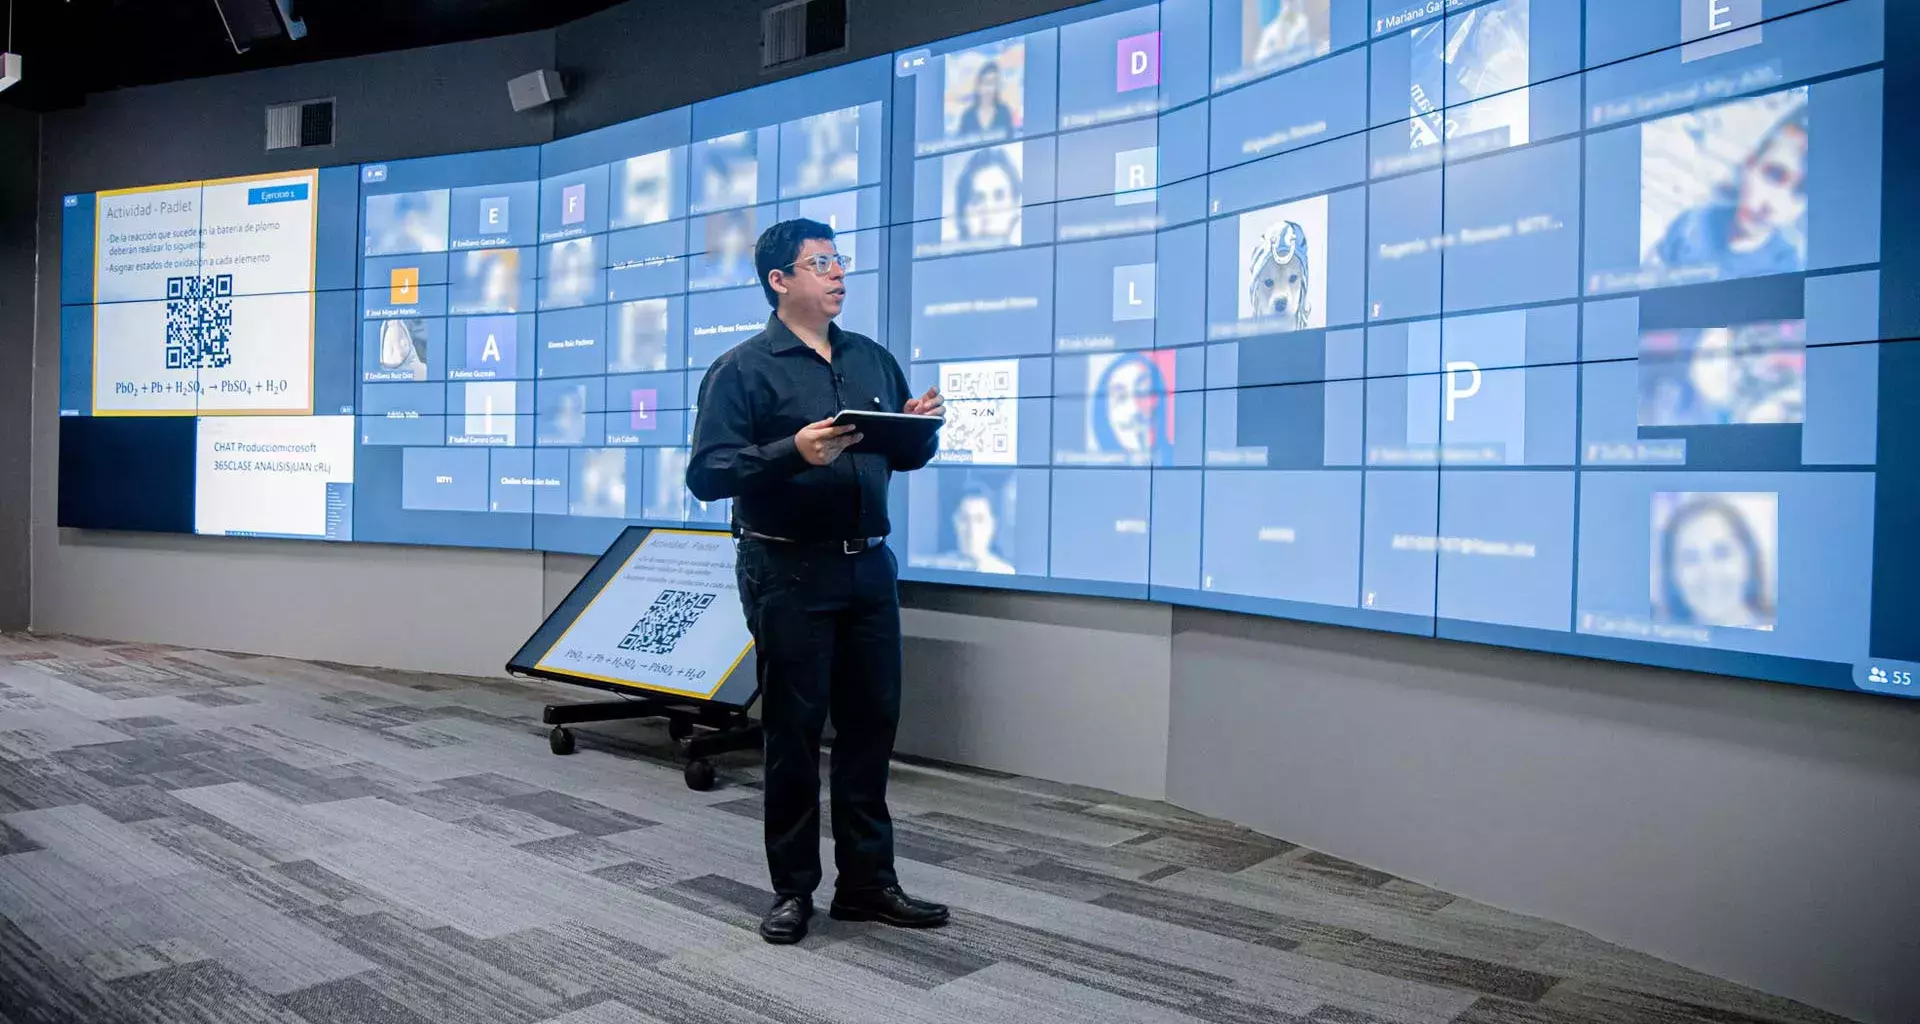 Here’s the new immersive classroom experience from Tec de Monterrey